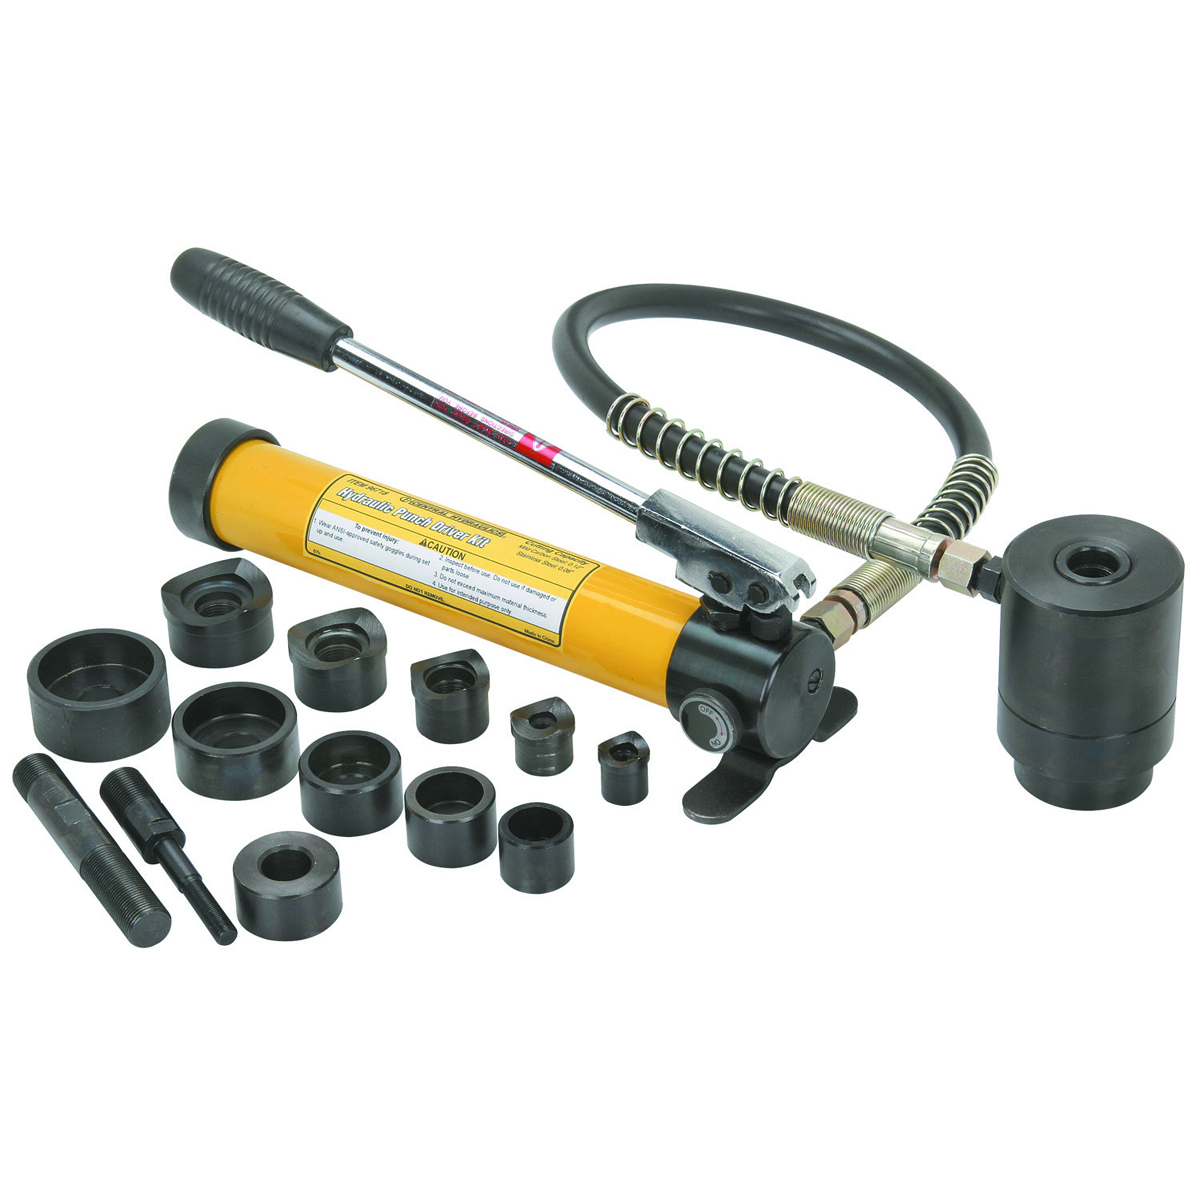 PITTSBURGH AUTOMOTIVE 14 Piece Hydraulic Punch Driver Kit - Item 96718 / 56411